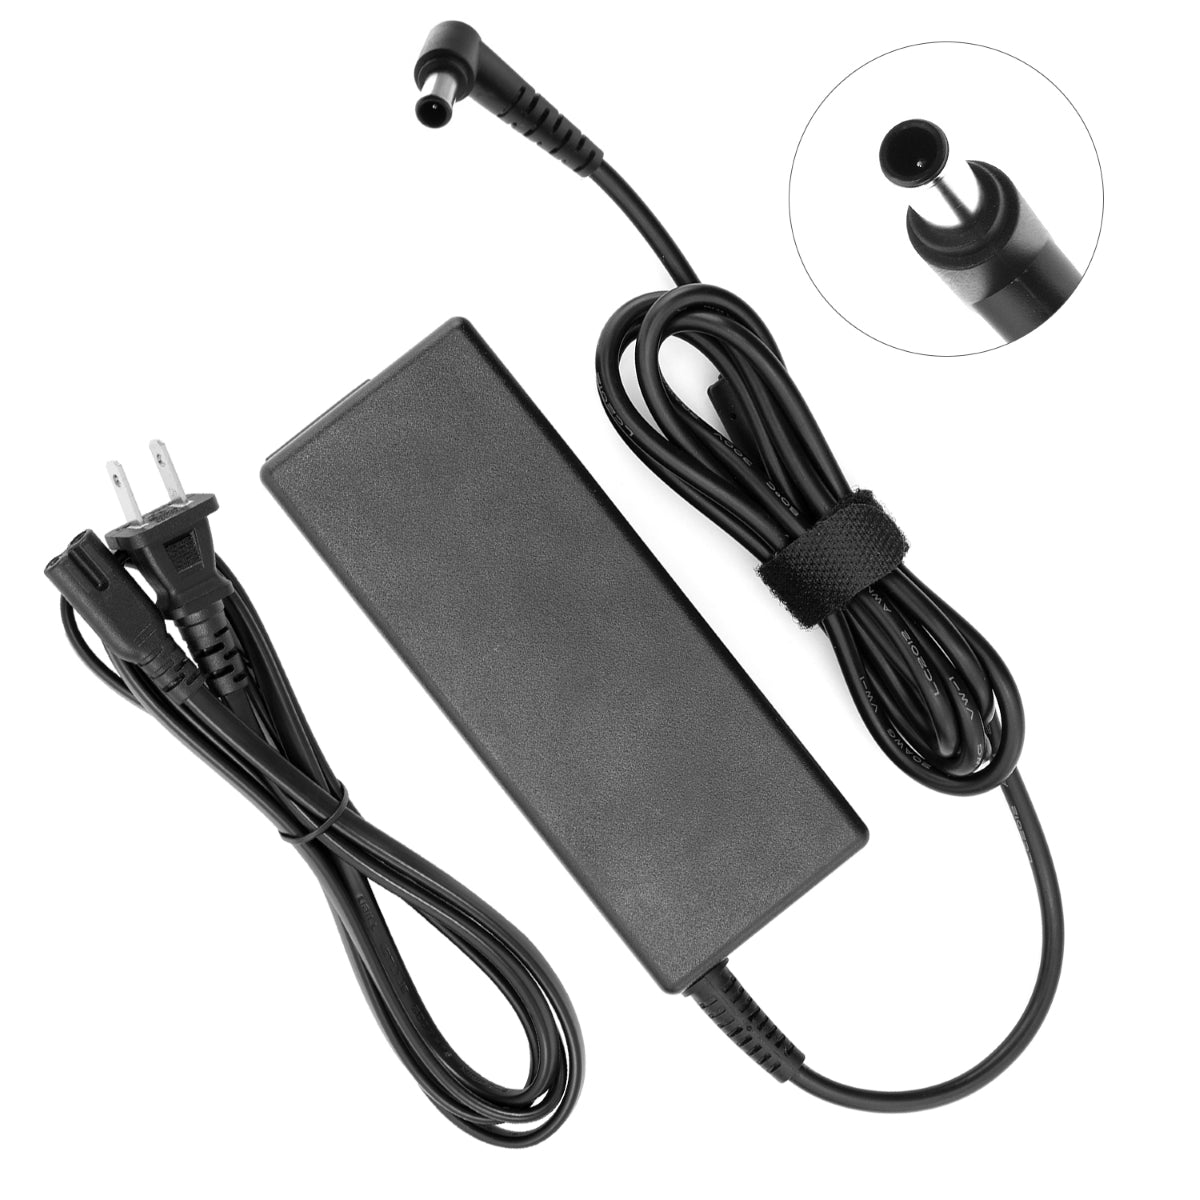 Power Adapter for LG 27UL650-W Monitor TV